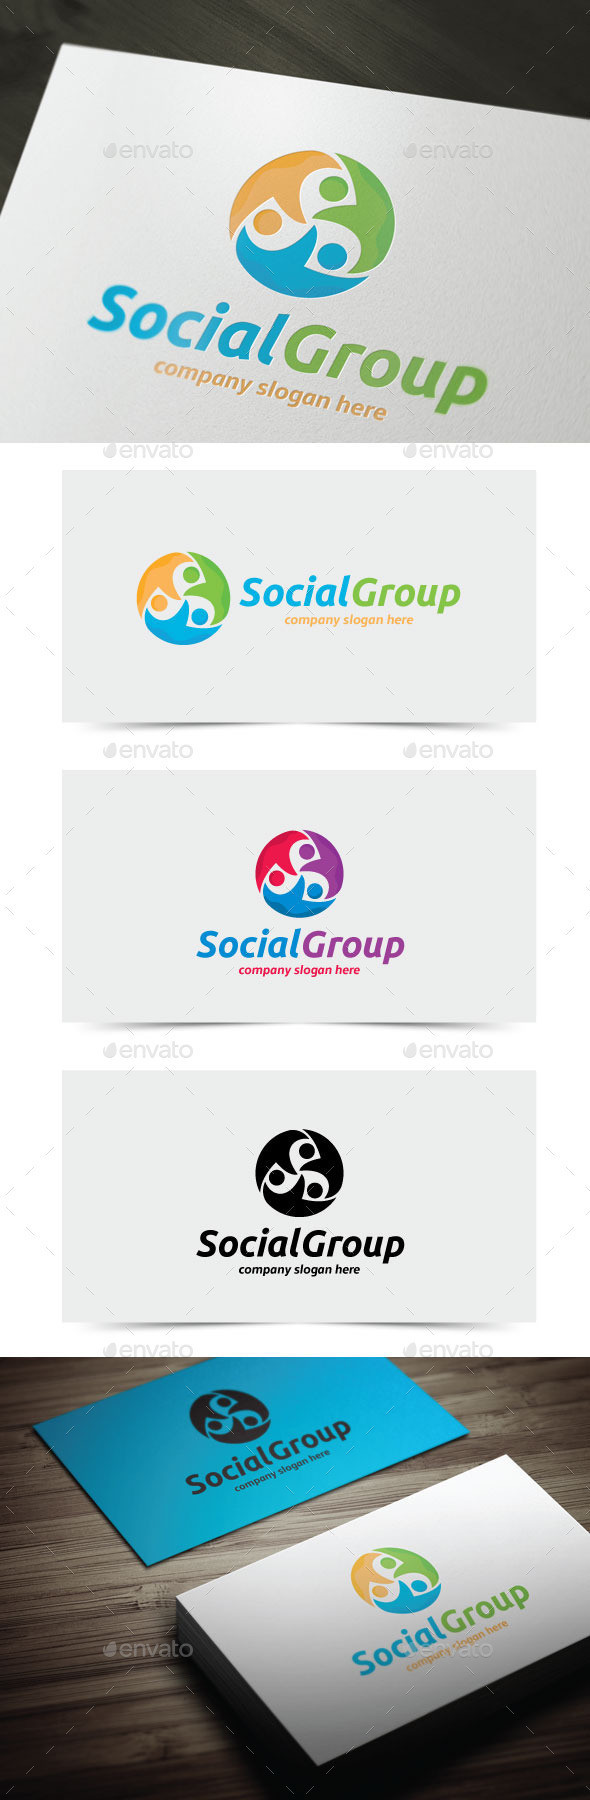 Social group preview